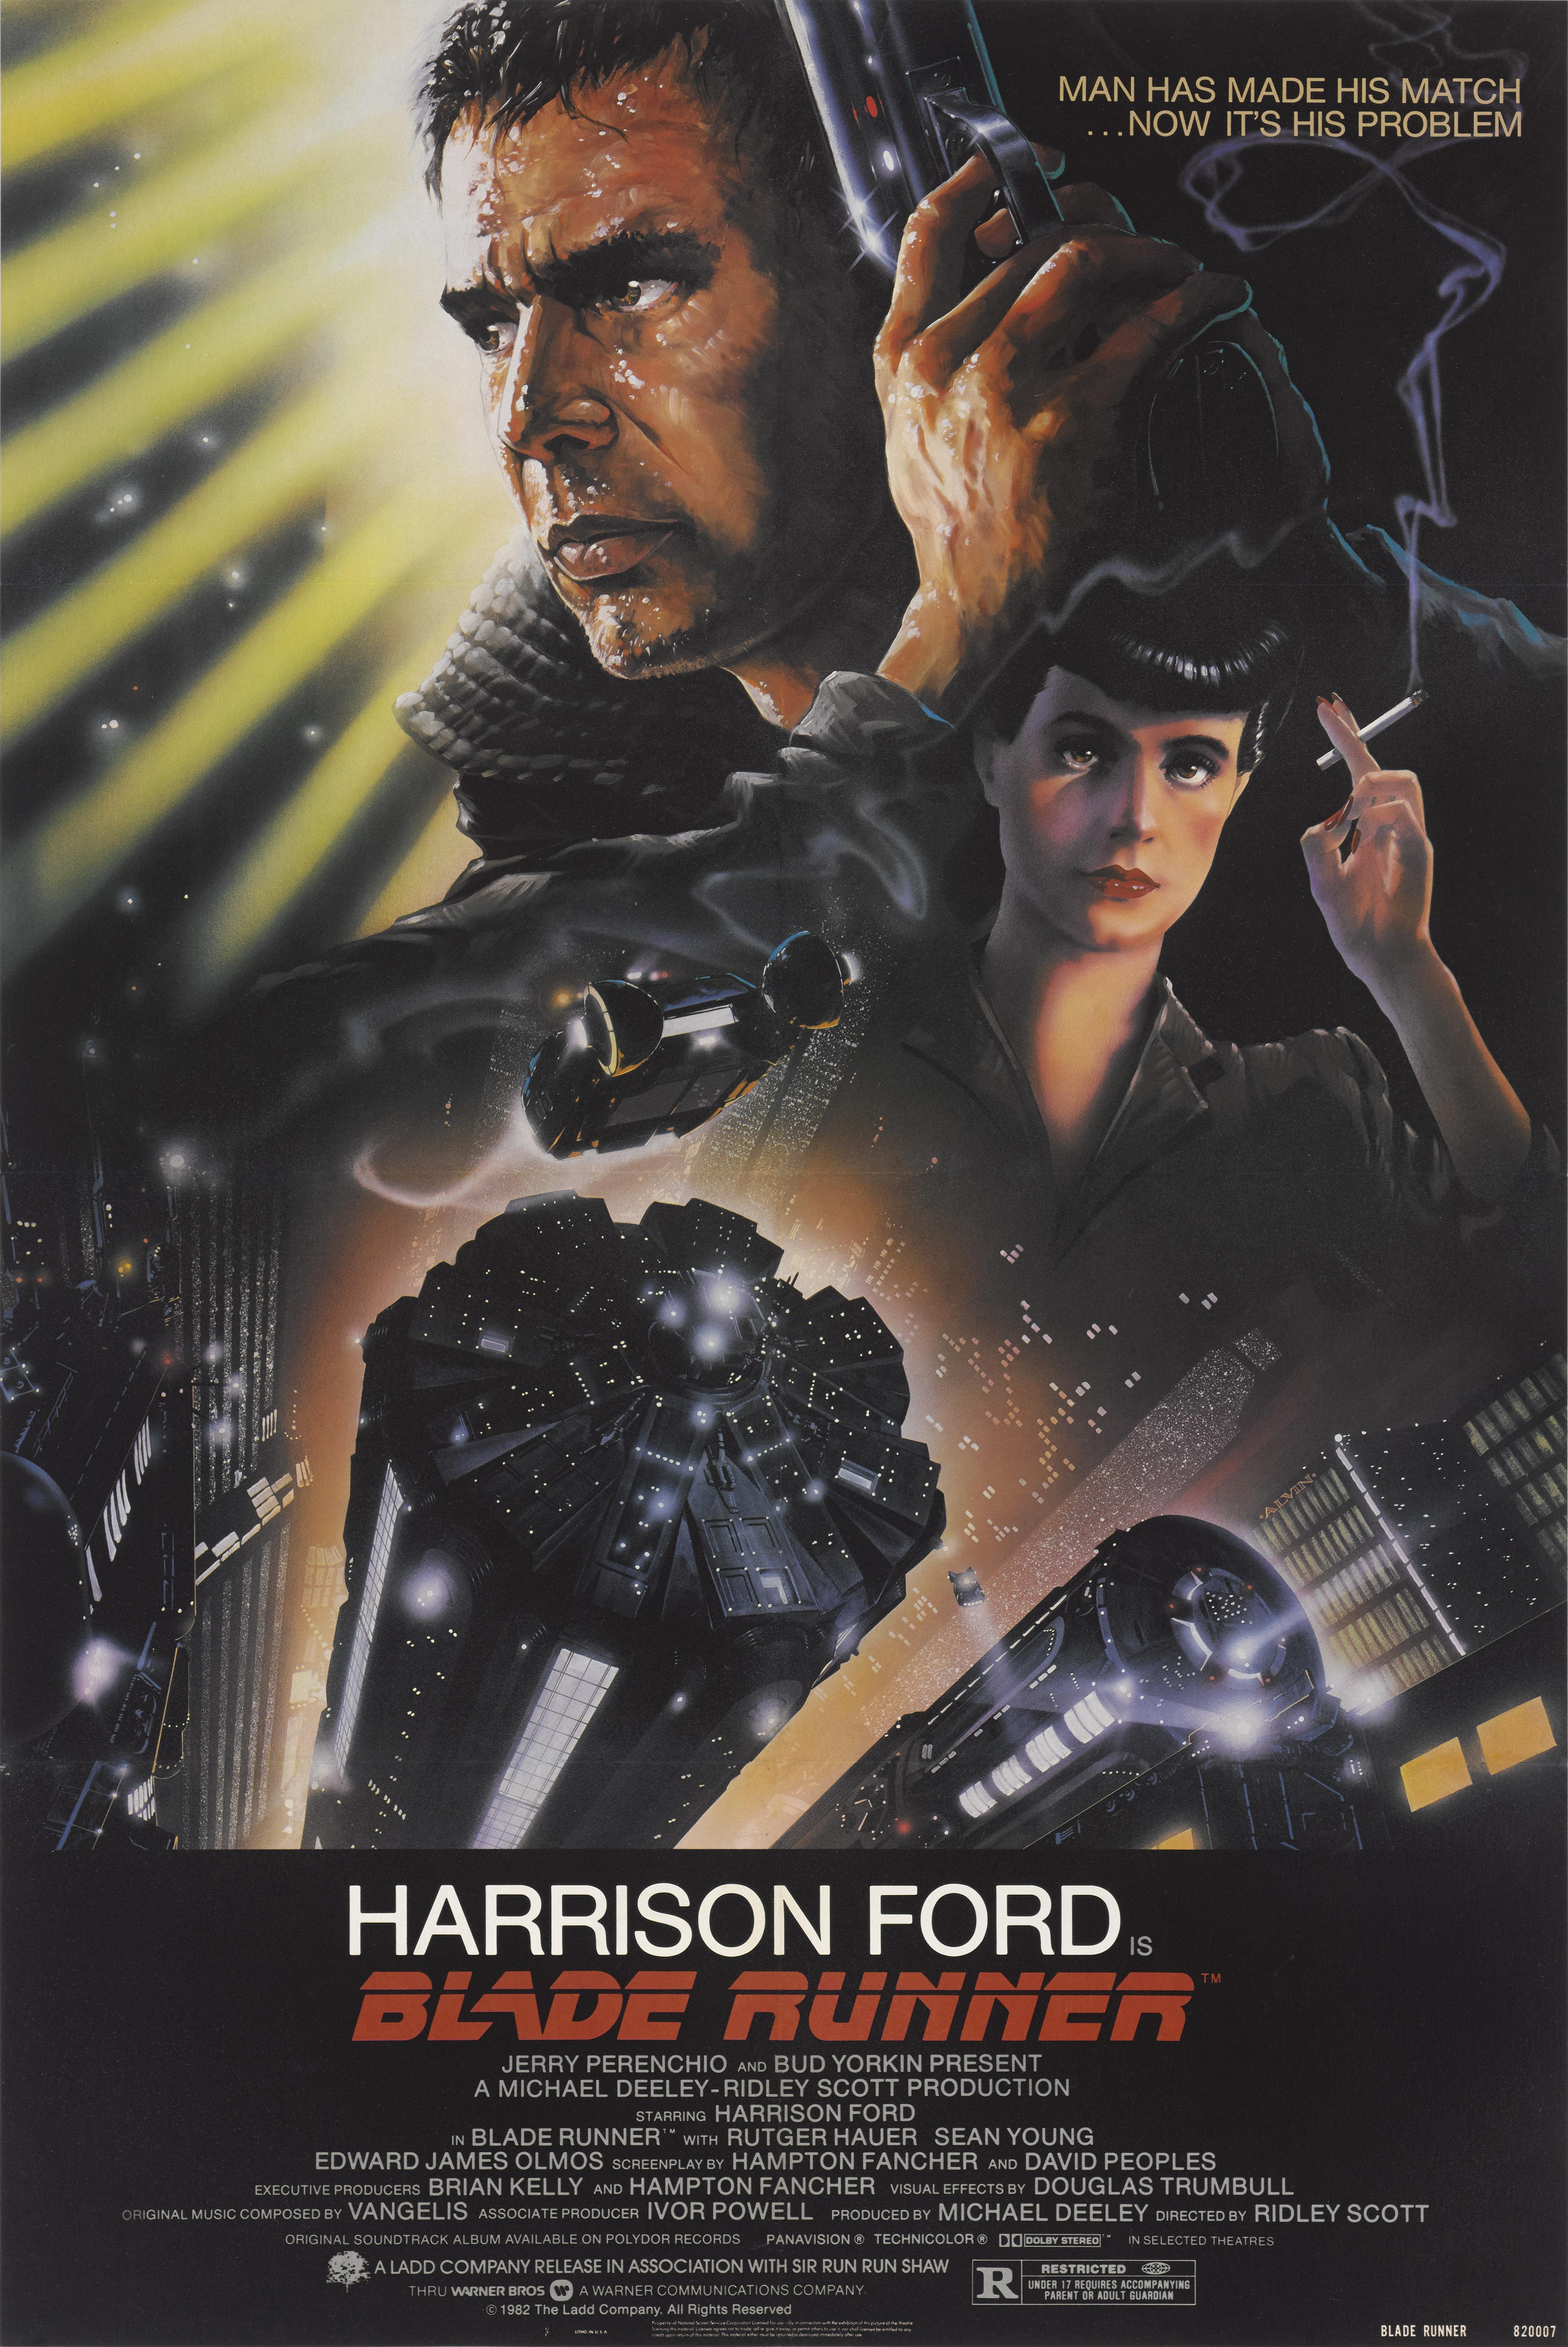 Original US film poster Ridley Scott's 1980s sci-fi film has become a true cult classic. Thirty-five years on a sequel (Blade Runner 2049) was made, also starring Harrison Ford. John Alvin's artwork for Blade Runner is one of the most memorable